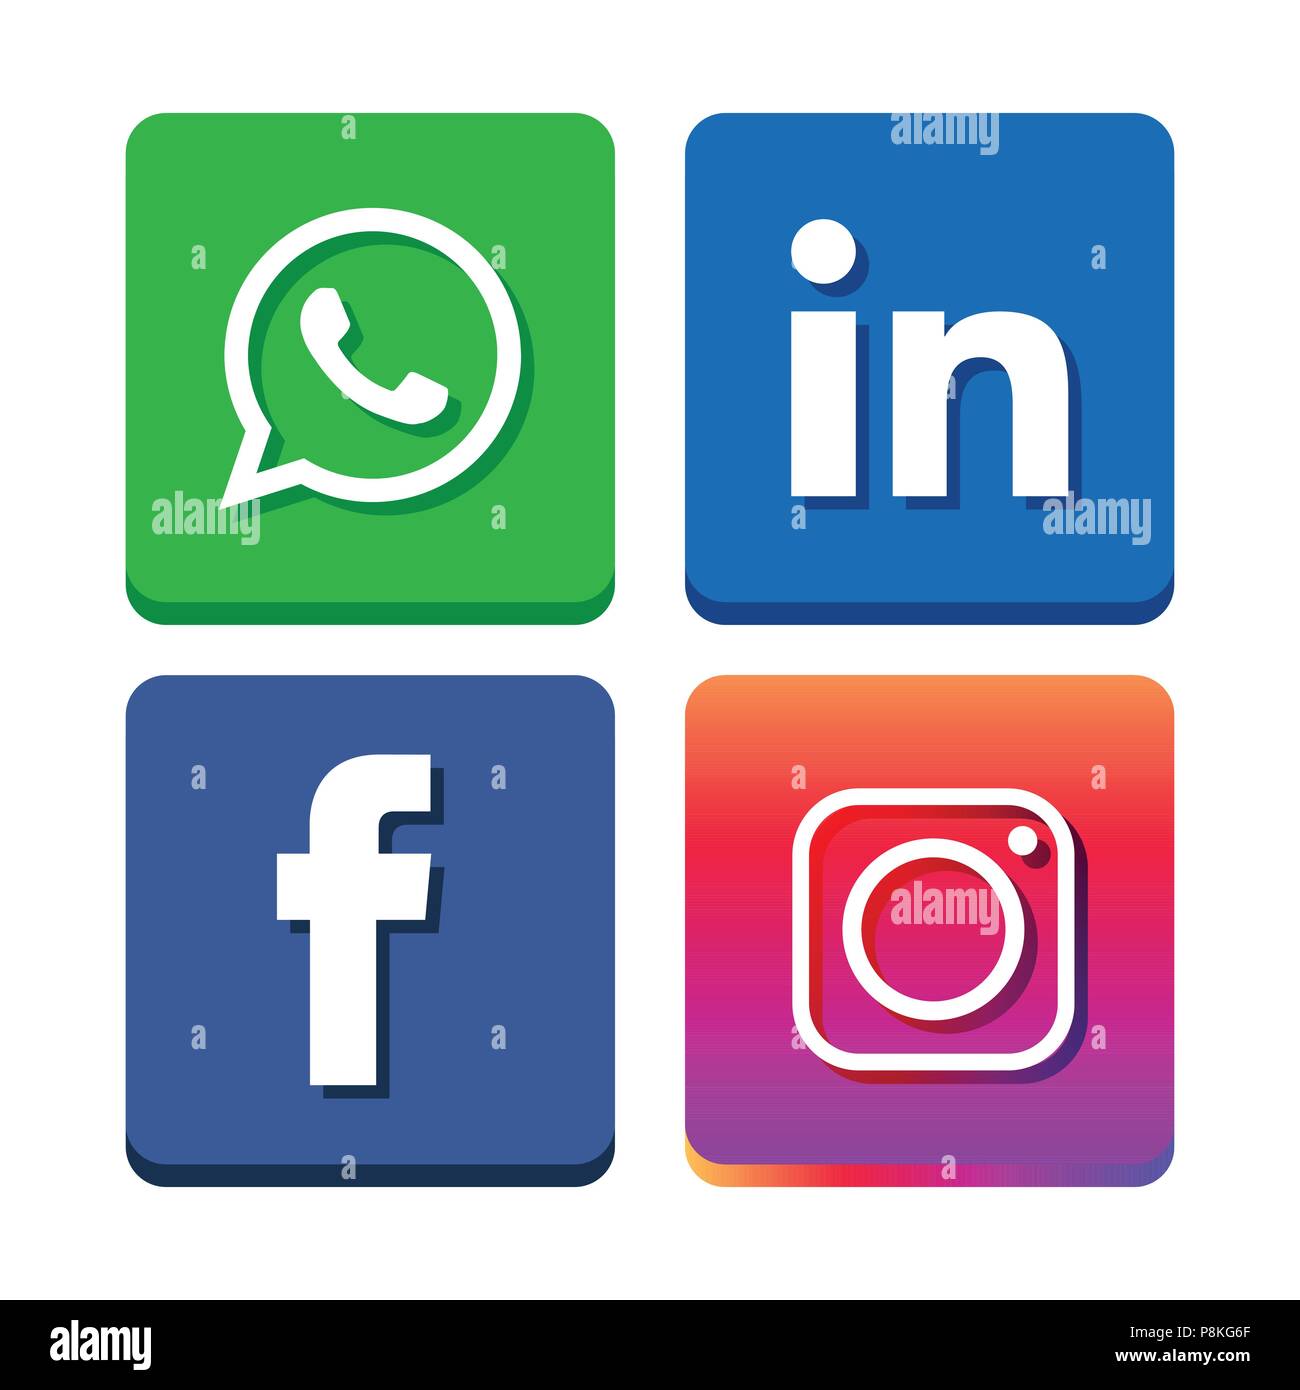 Set Of Flat Design Sale Stickers Vector Illustrations Of Whatsapp